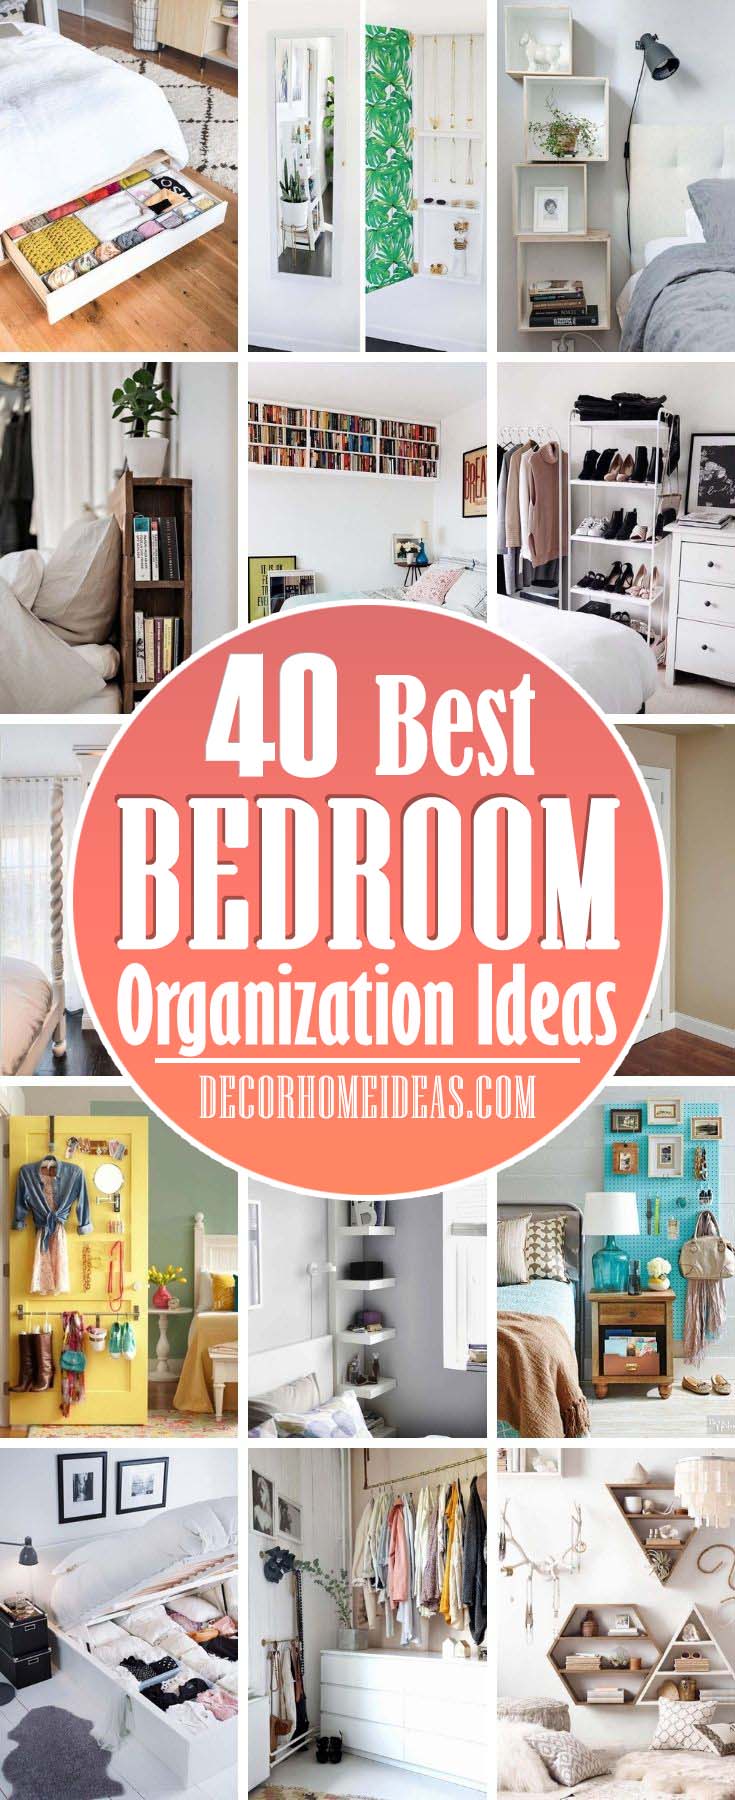 20 Best Bedroom Organization Ideas That Will Keep It Tidy and Neat ...